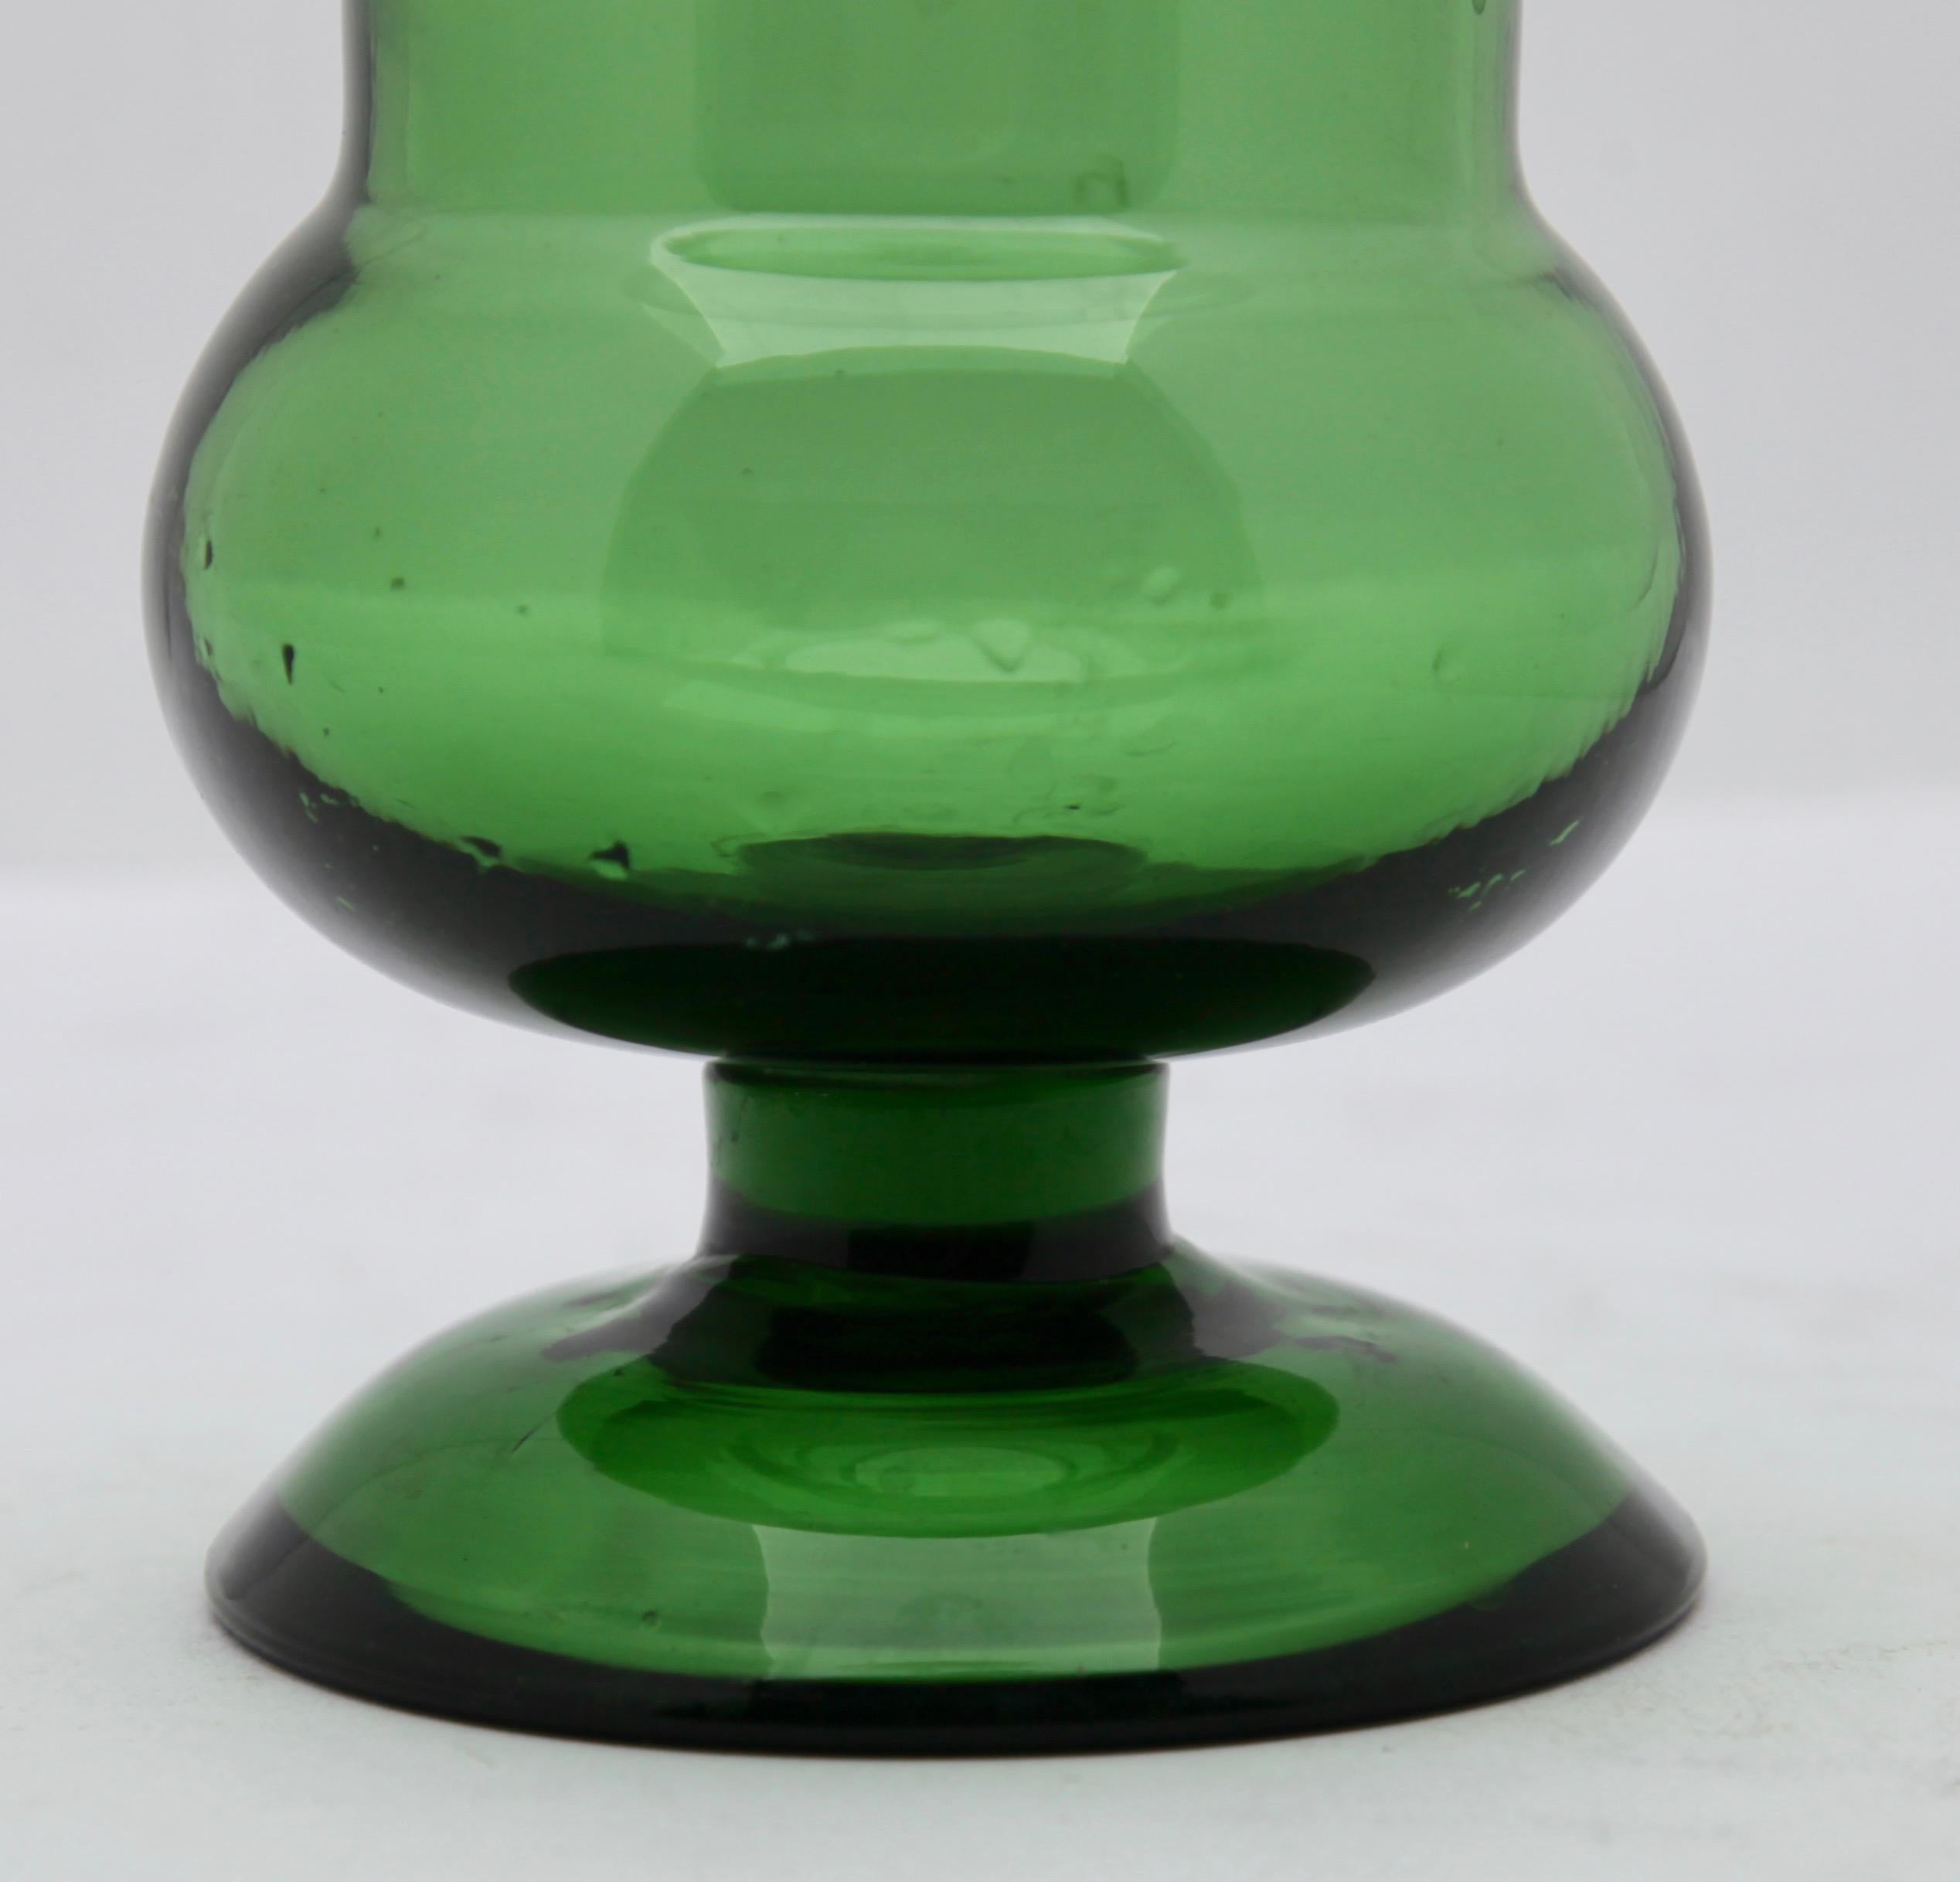 Italian Empoli Verde glass lidded pot in the style of an apothecary jar from the mid-20th century. Unusual design. Excellent condition.
The piece is in excellent condition and a real beauty!

We specialise in Art Nouveau, Art Deco and Vintage